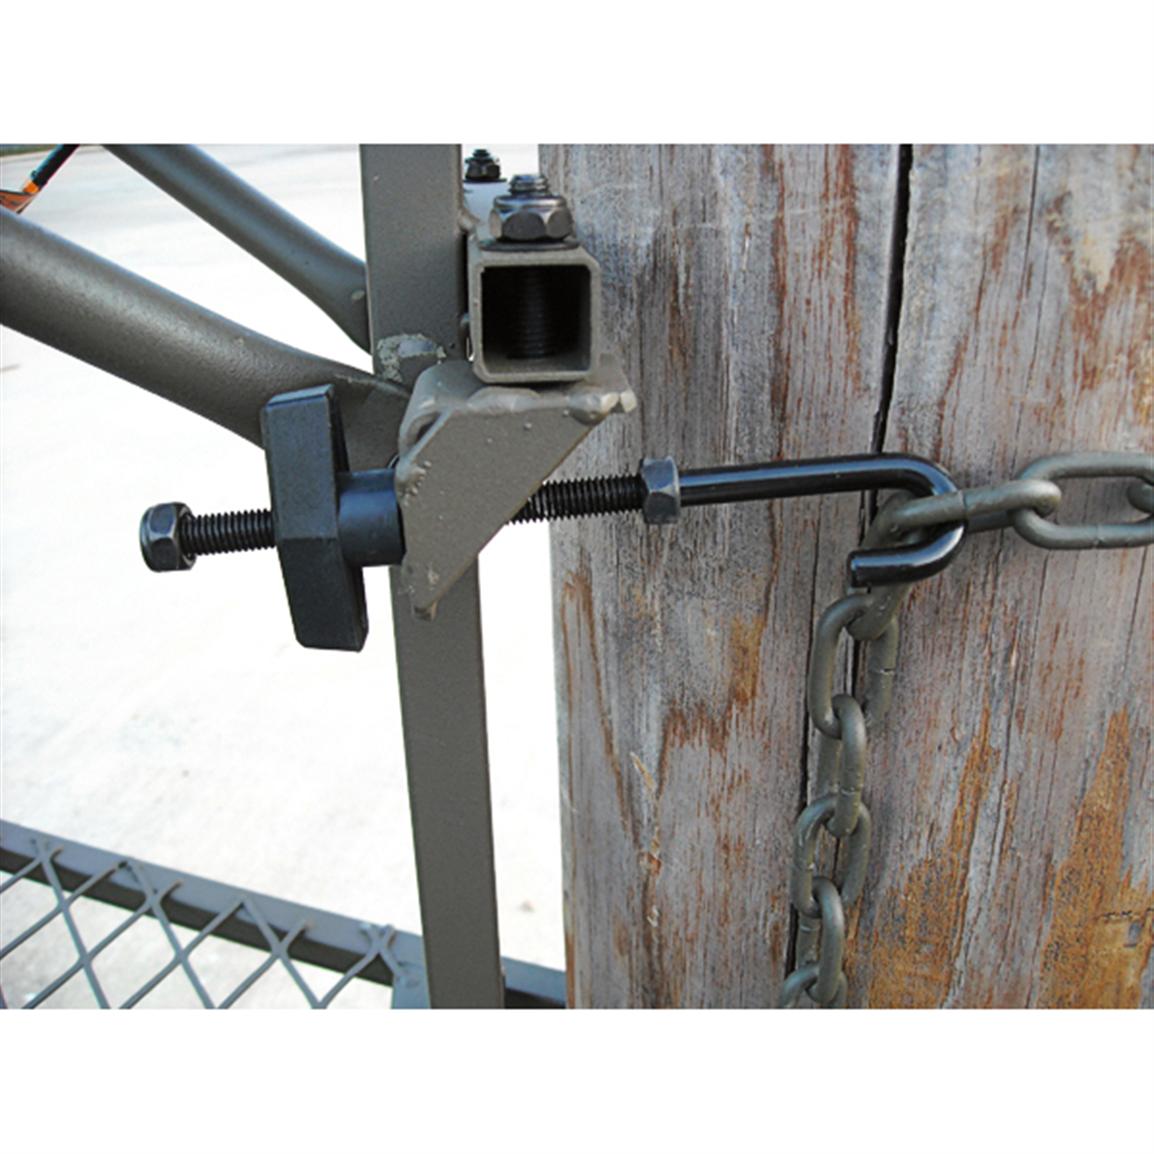 Where can I get treestand chain j hook/bolt?